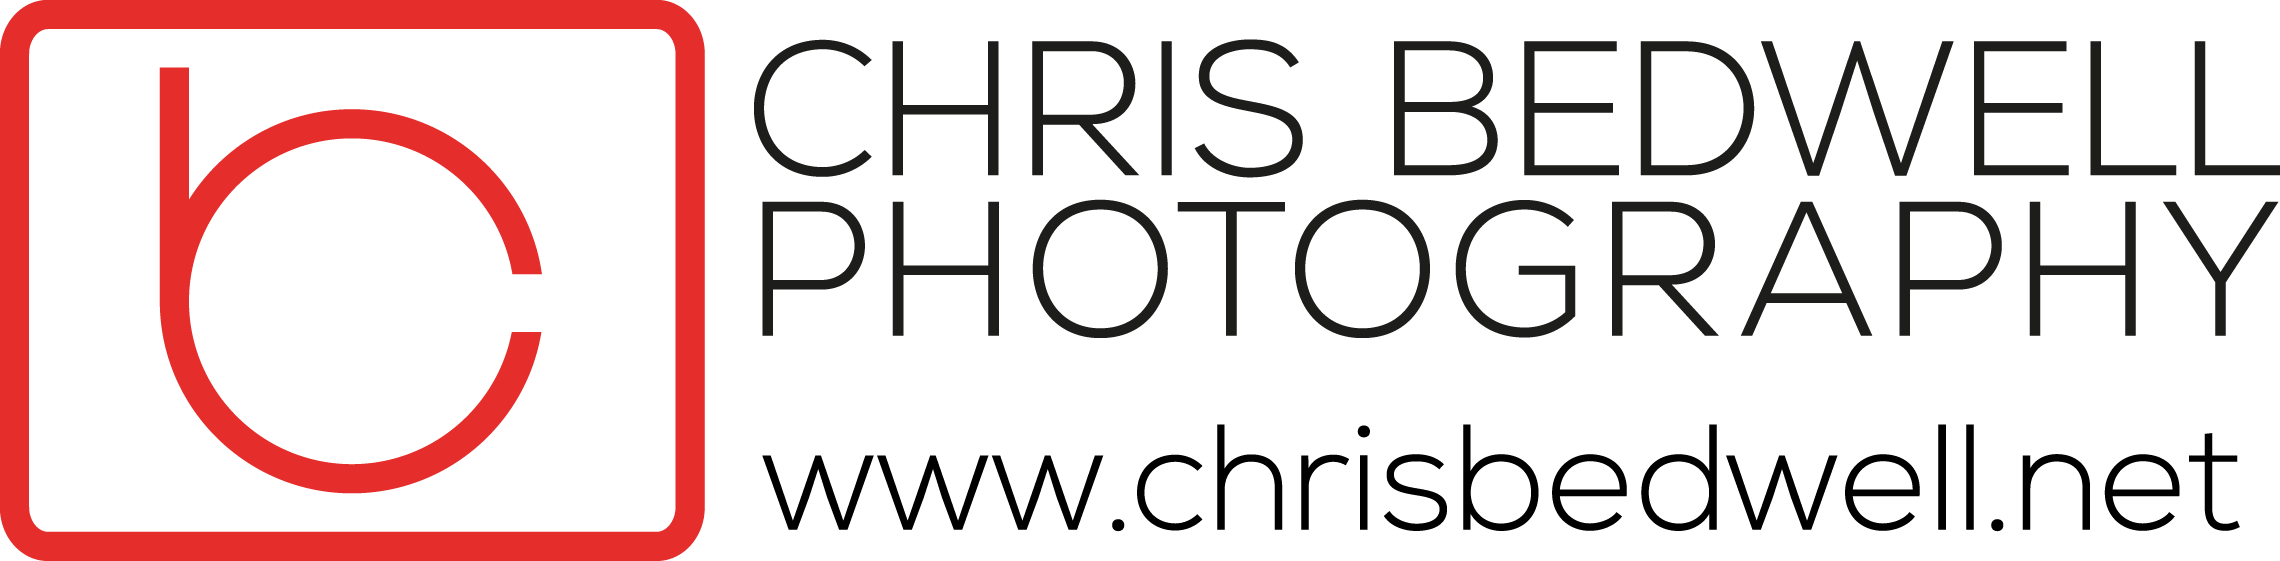 Chris Bedwell Photogrphy